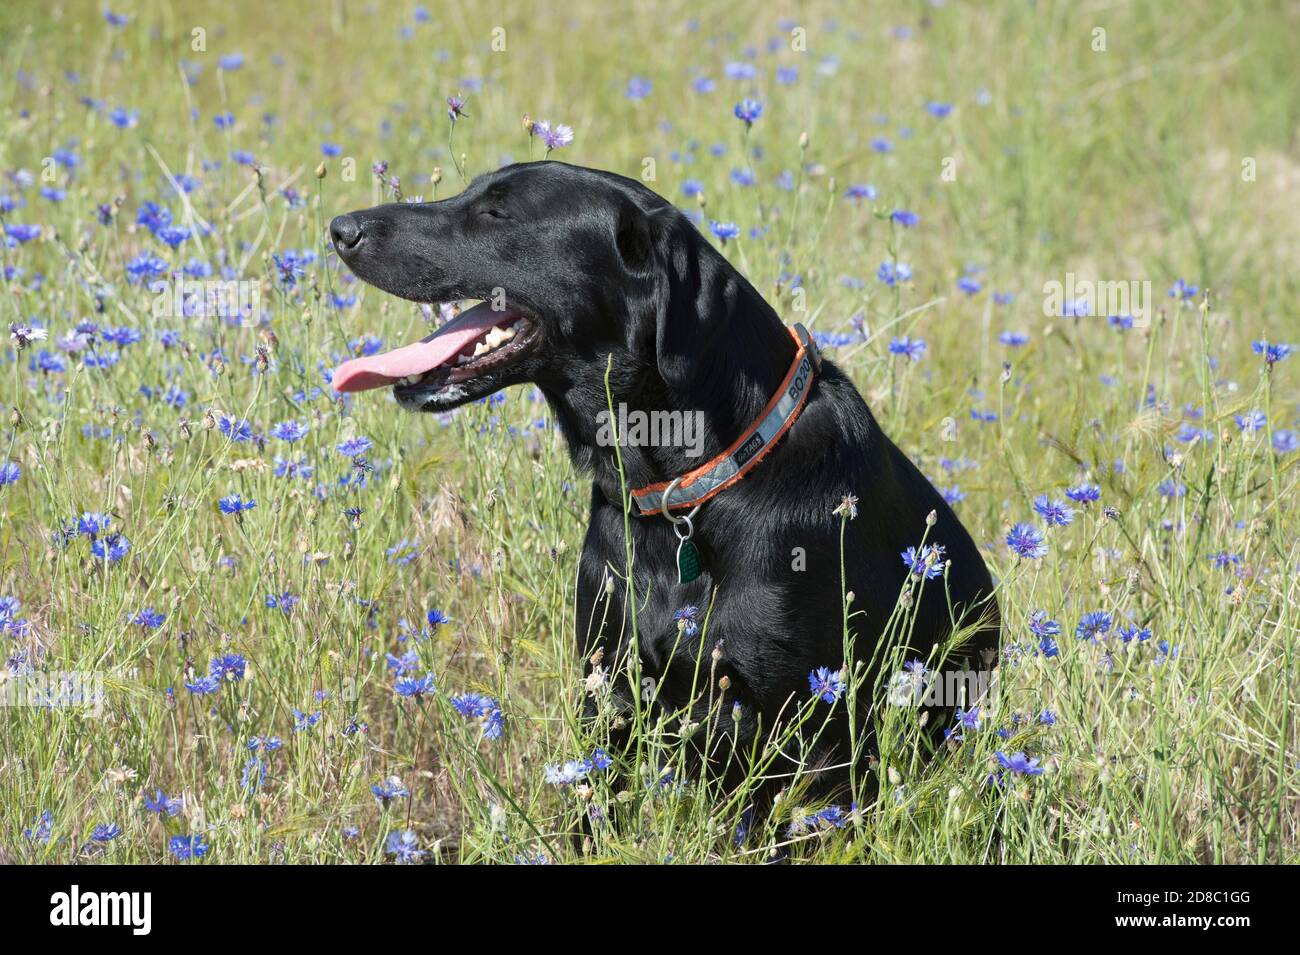 Black Labrador retriever sitting in field of bachelor buttons Stock Photo